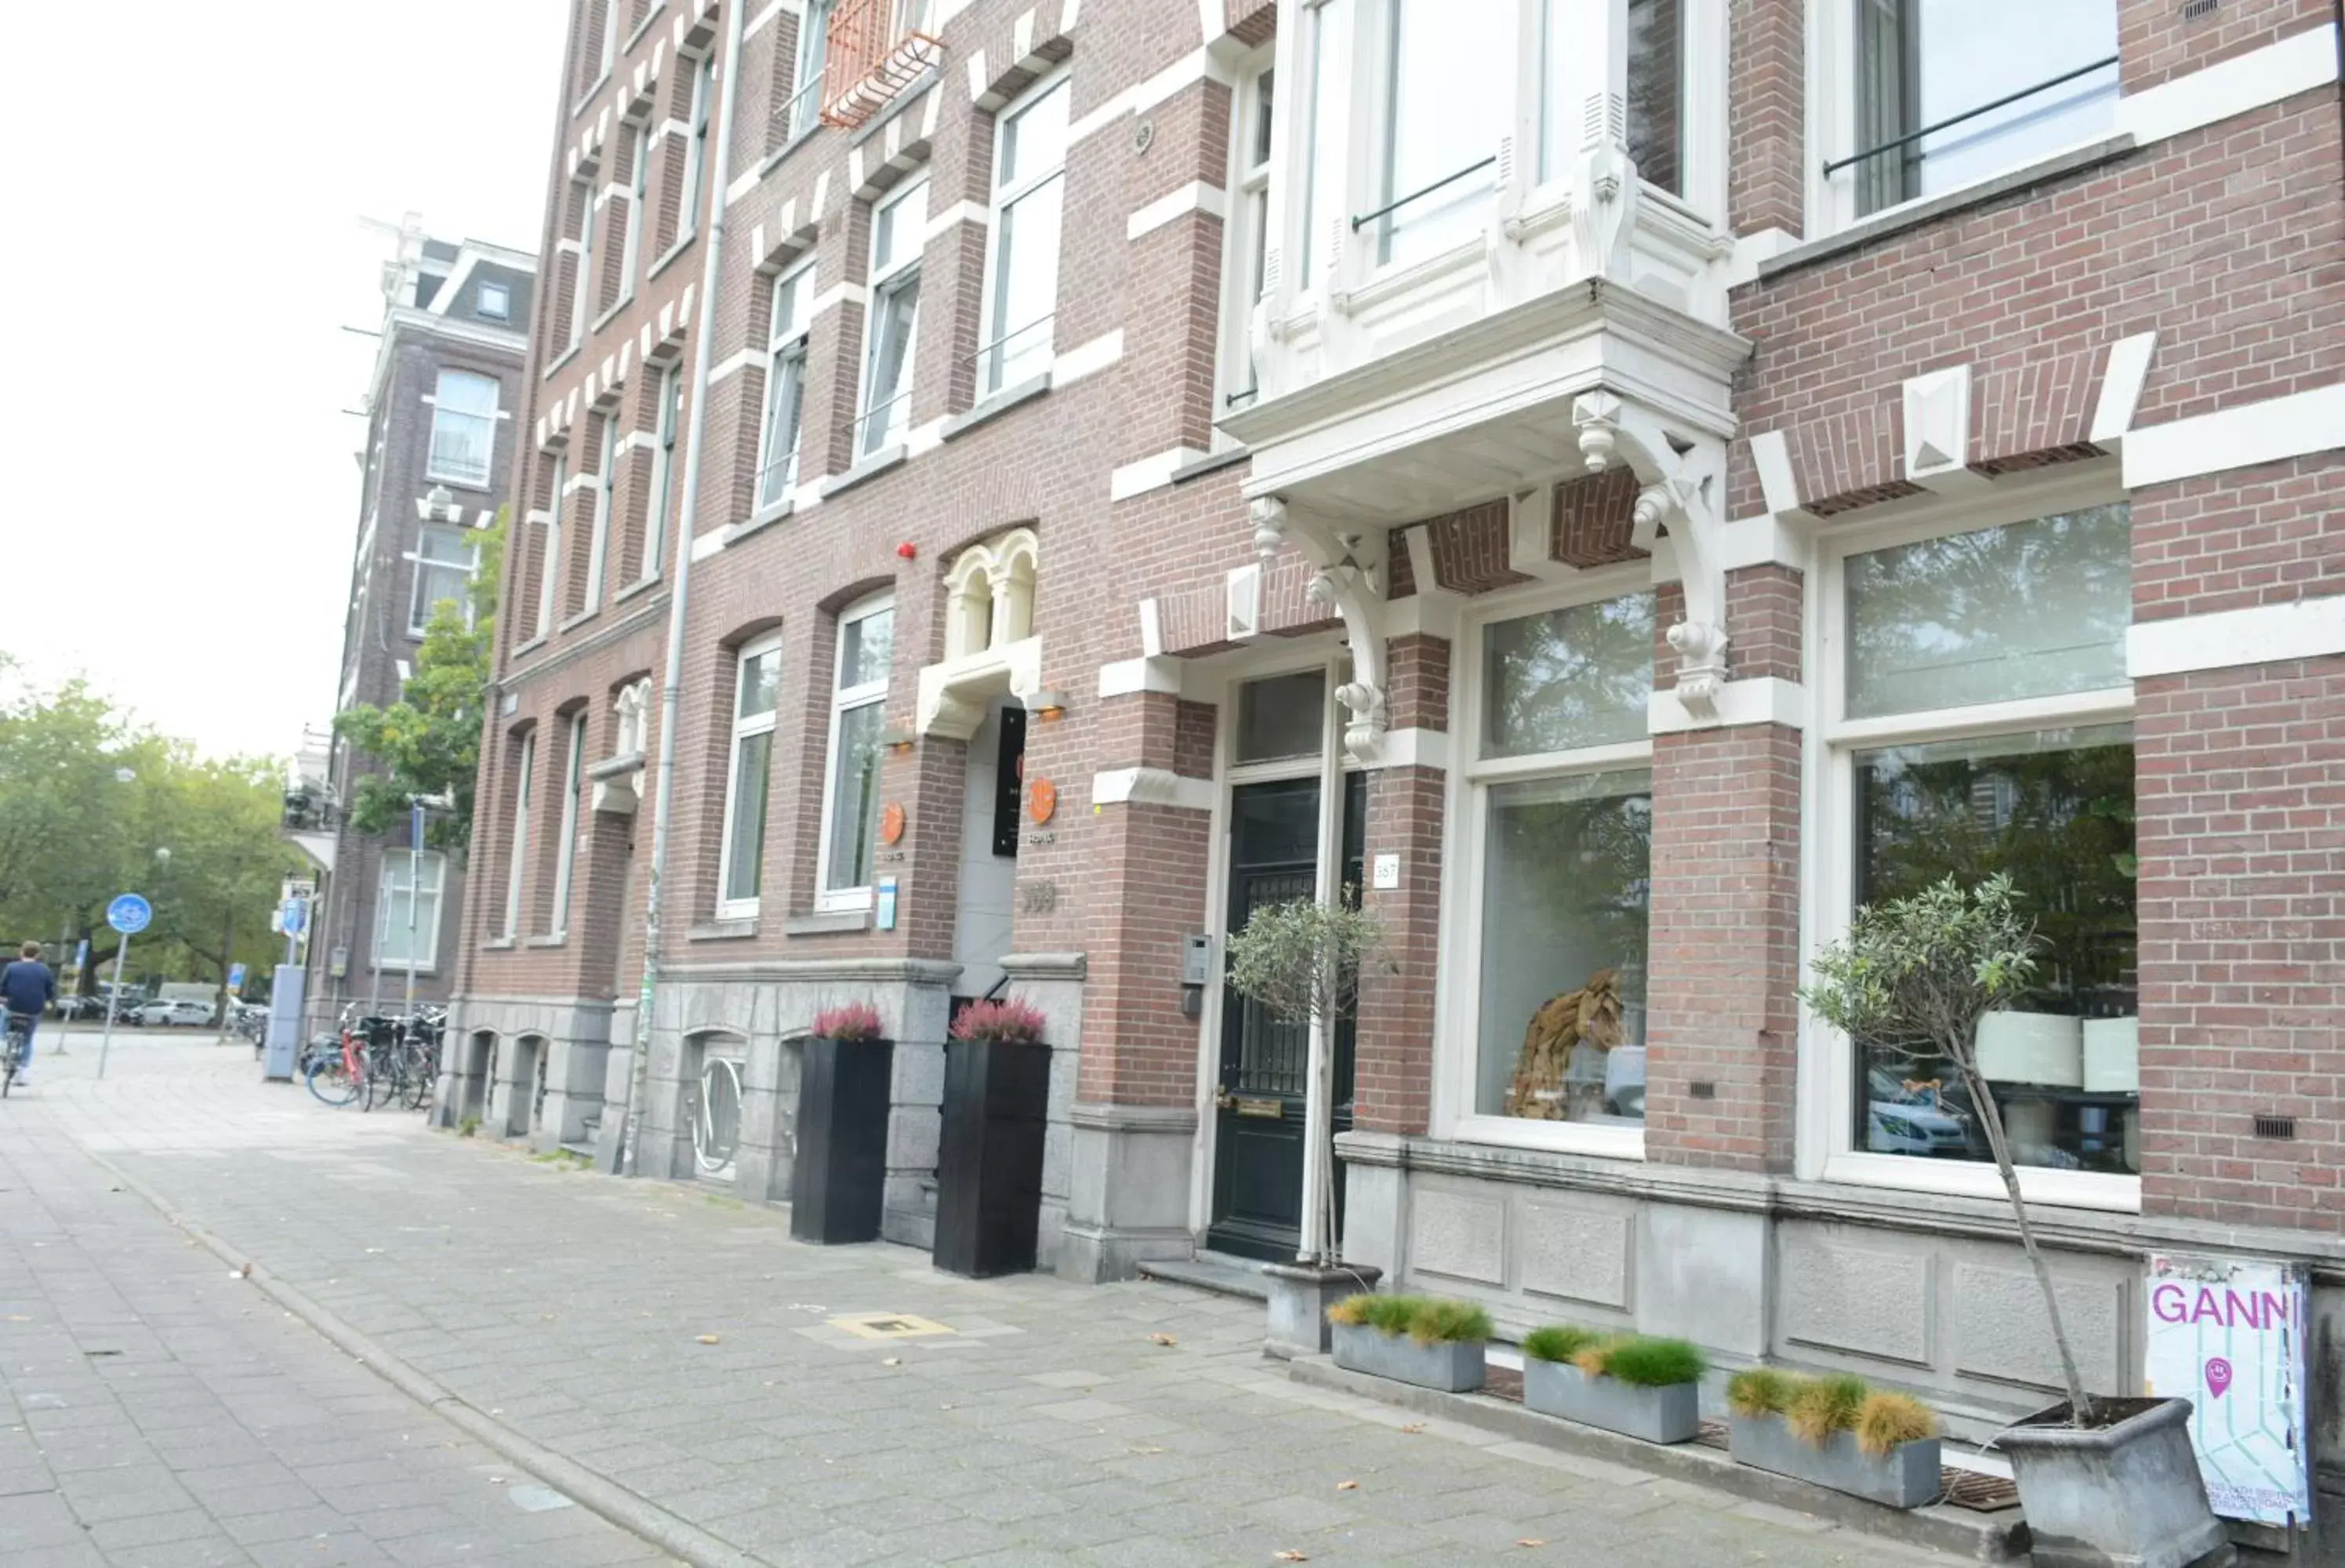 Property Building in NL Hotel District Leidseplein